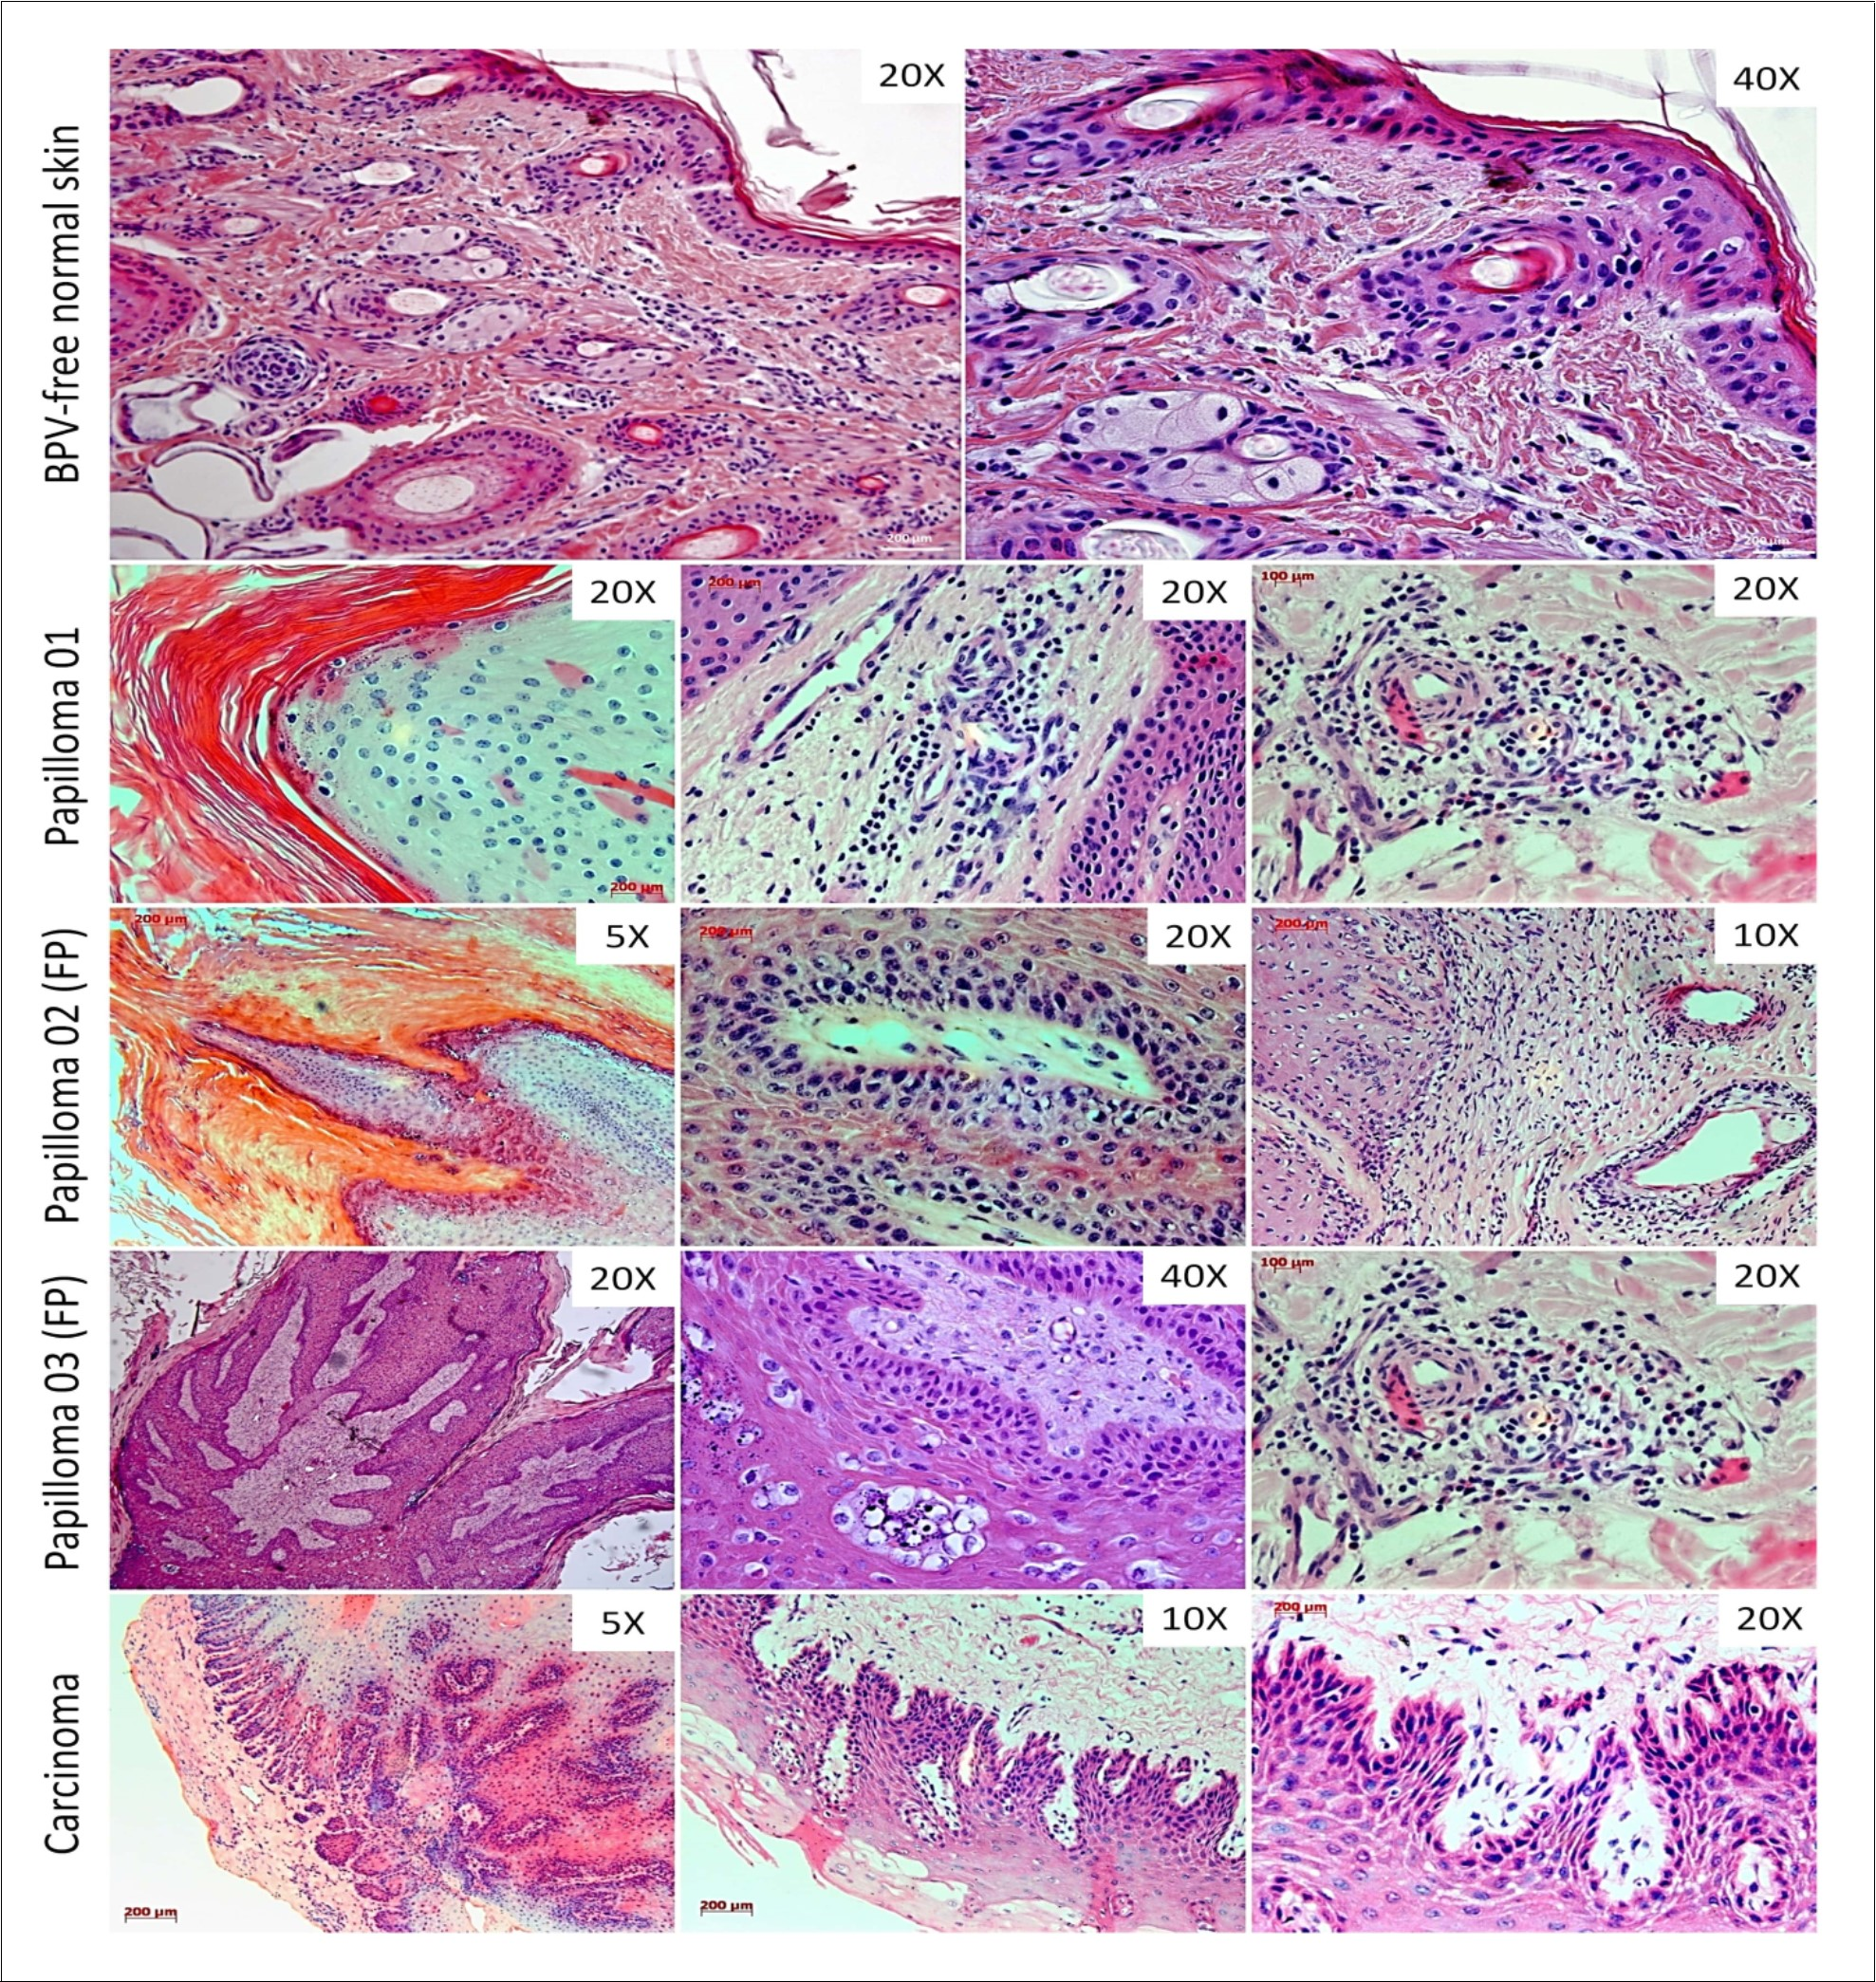  Histopathological analysis showing the tissue architecture preservation in BPV-free normal skin. The cutaneous papilloma, fibropapilloma (FP) and esophageal carcinoma showed acanthosis and koilocytosis, characteristics even verified in BPV-infected lesions. The samples of papilloma 02 and 03 showed a fibroelastic and reactive dermis, due to these characteristics, these samples were classified as fibropailloma (FB). Both cutaneous papilloma and fibropapilloma showed an extensive inflammatory infiltrate into the dermis. Esophageal carcinoma exhibited the sites of atypia, where was verified the loss of cell polarity, the presence of cancer cell islands into the dermis, comprised by fibroblastoid keratinocytes, being compatible with epithelial-mesenchymal transition (EMT).